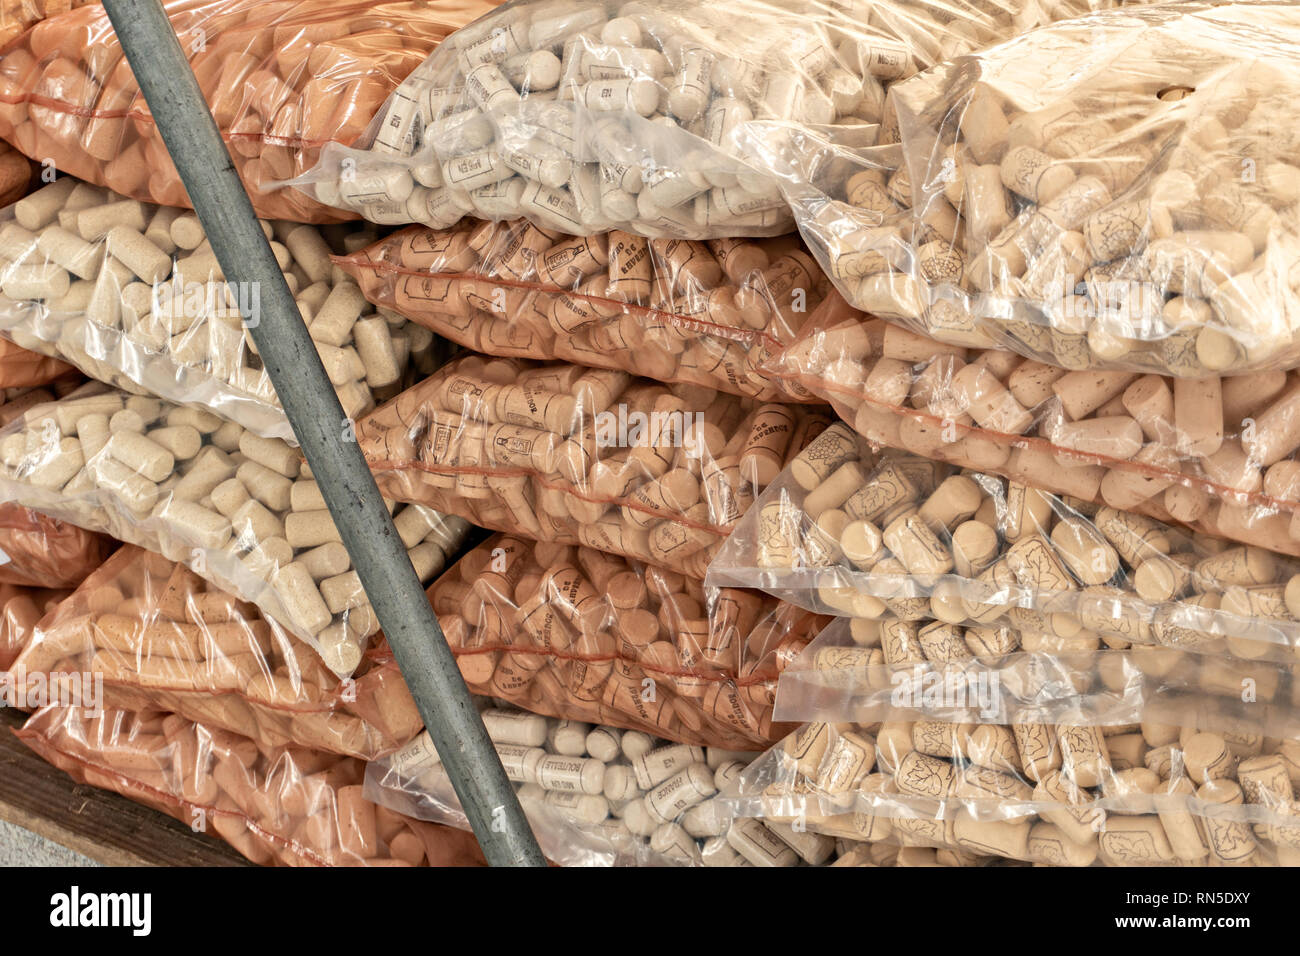 Wine cork in bags at street market. Wine industry Stock Photo